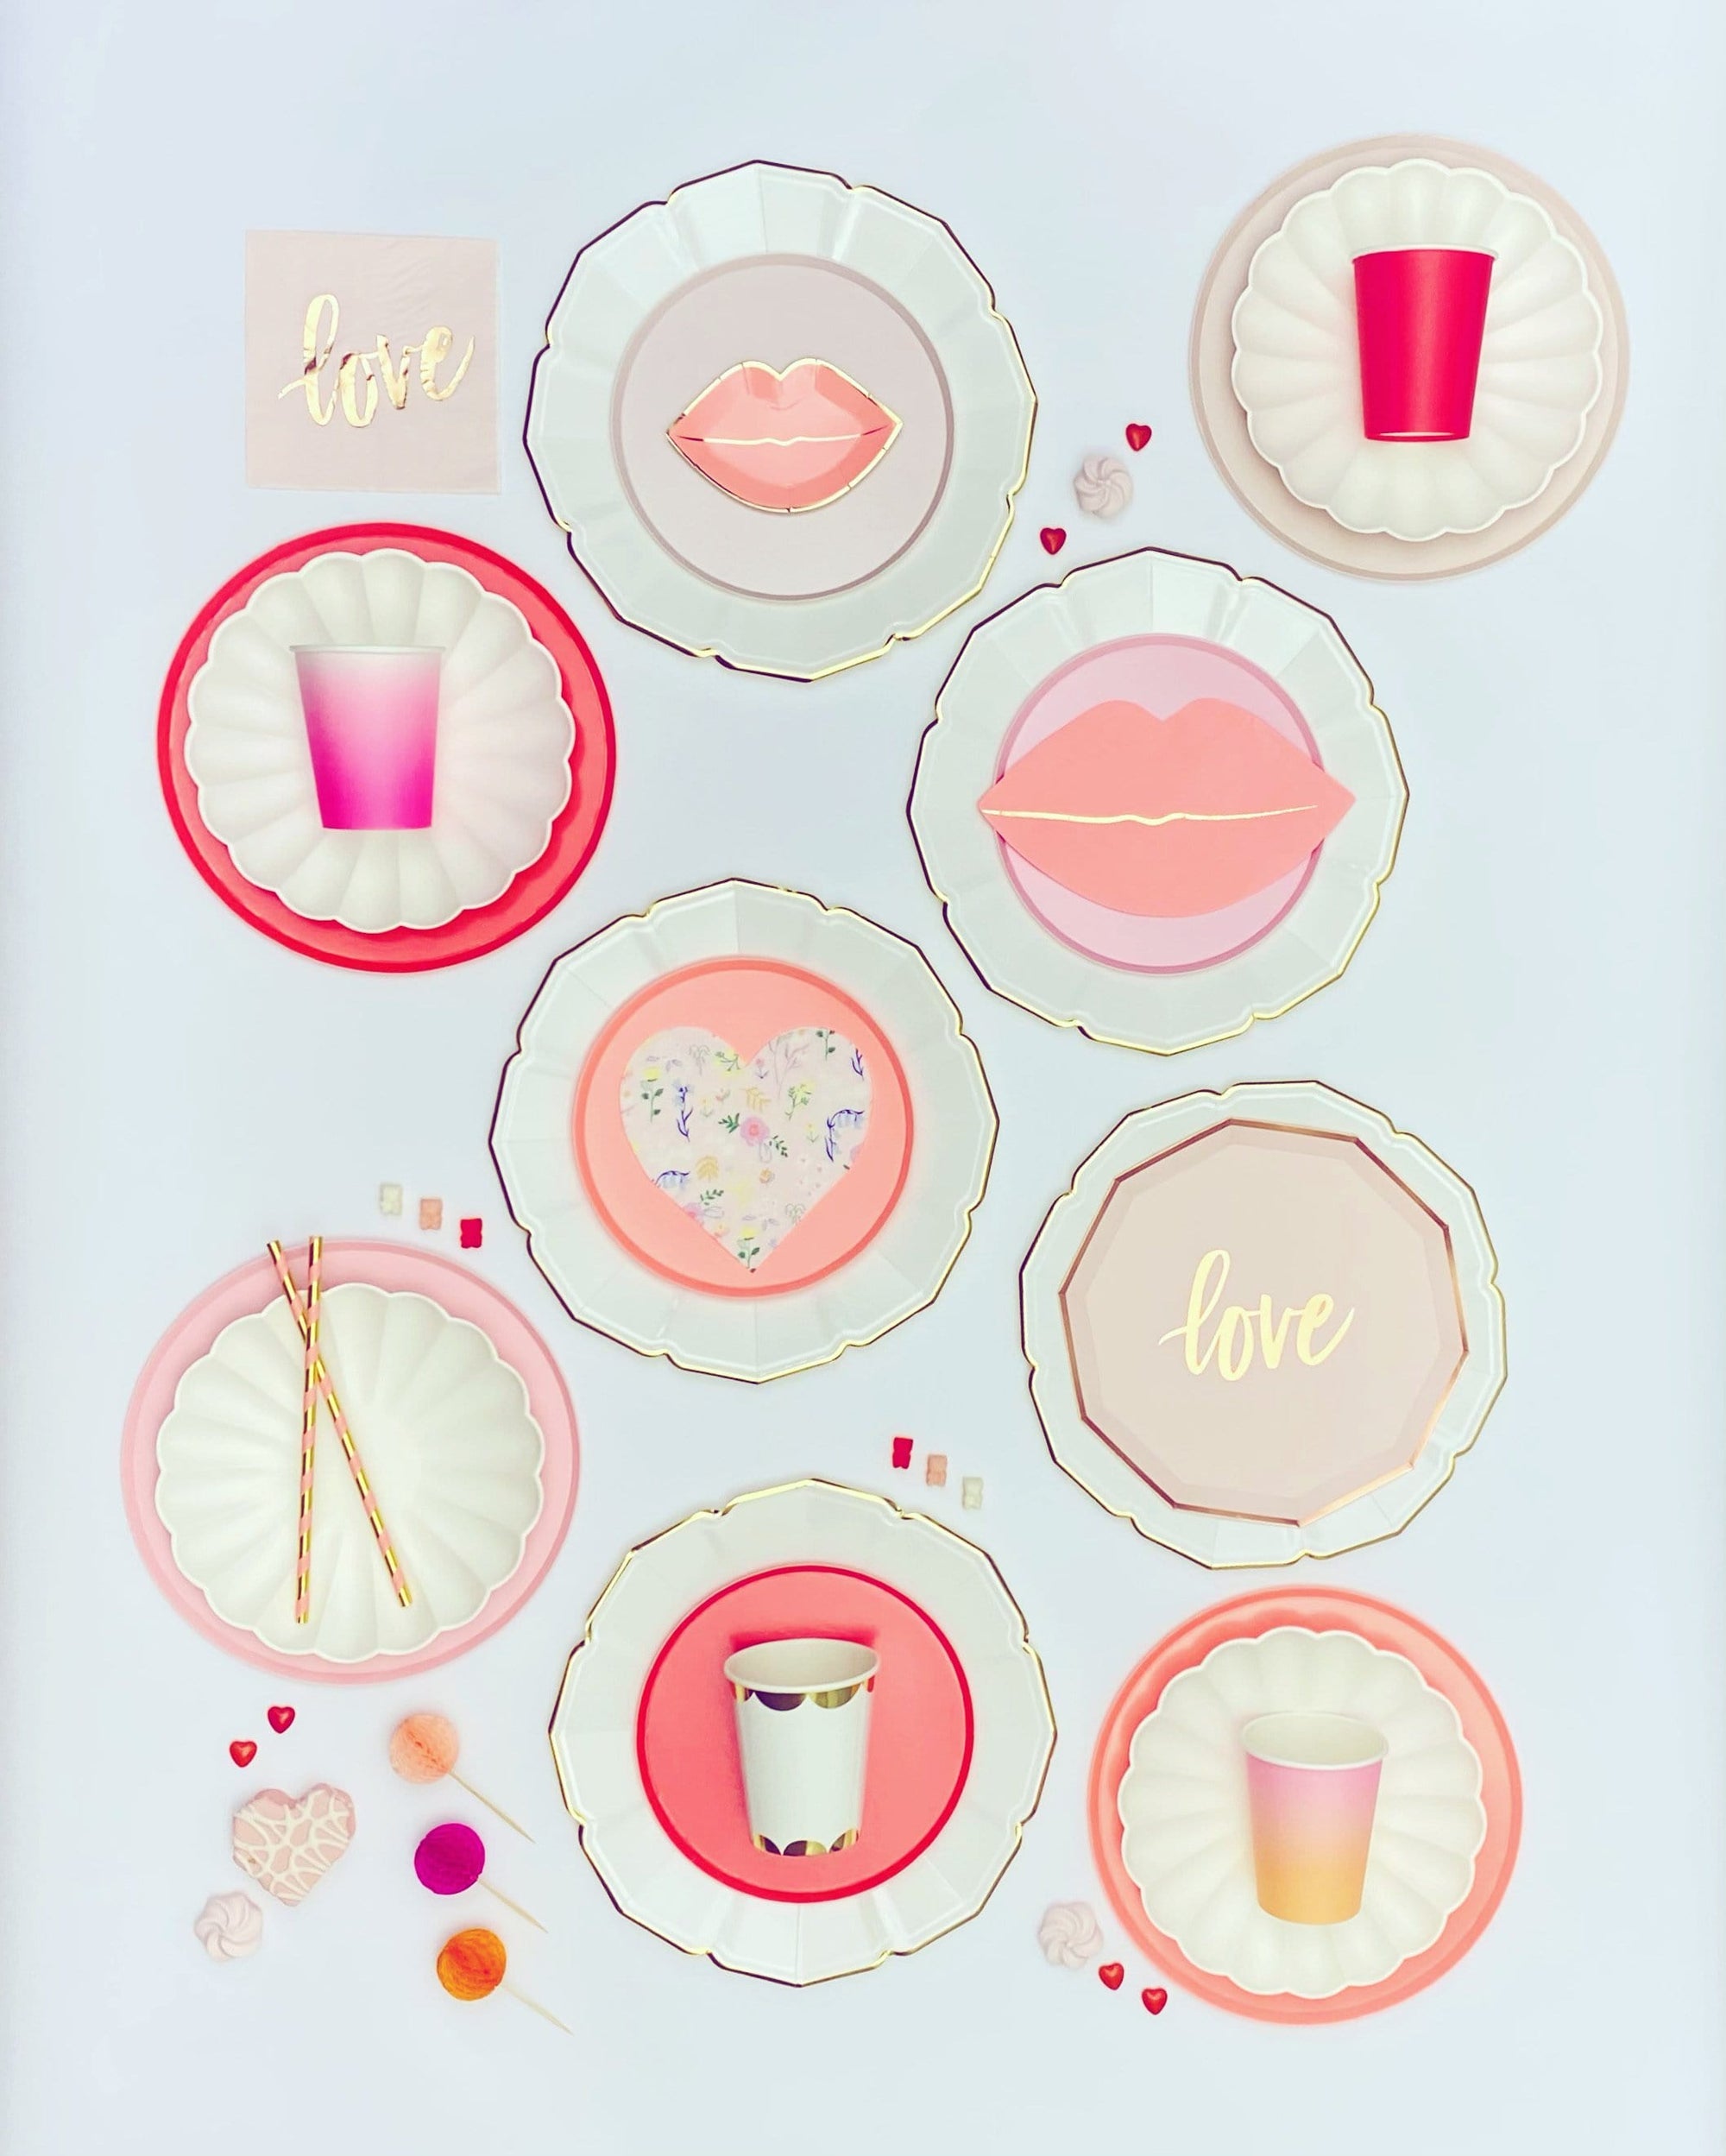 Assorted Pink Ombre Circle Plates - Small